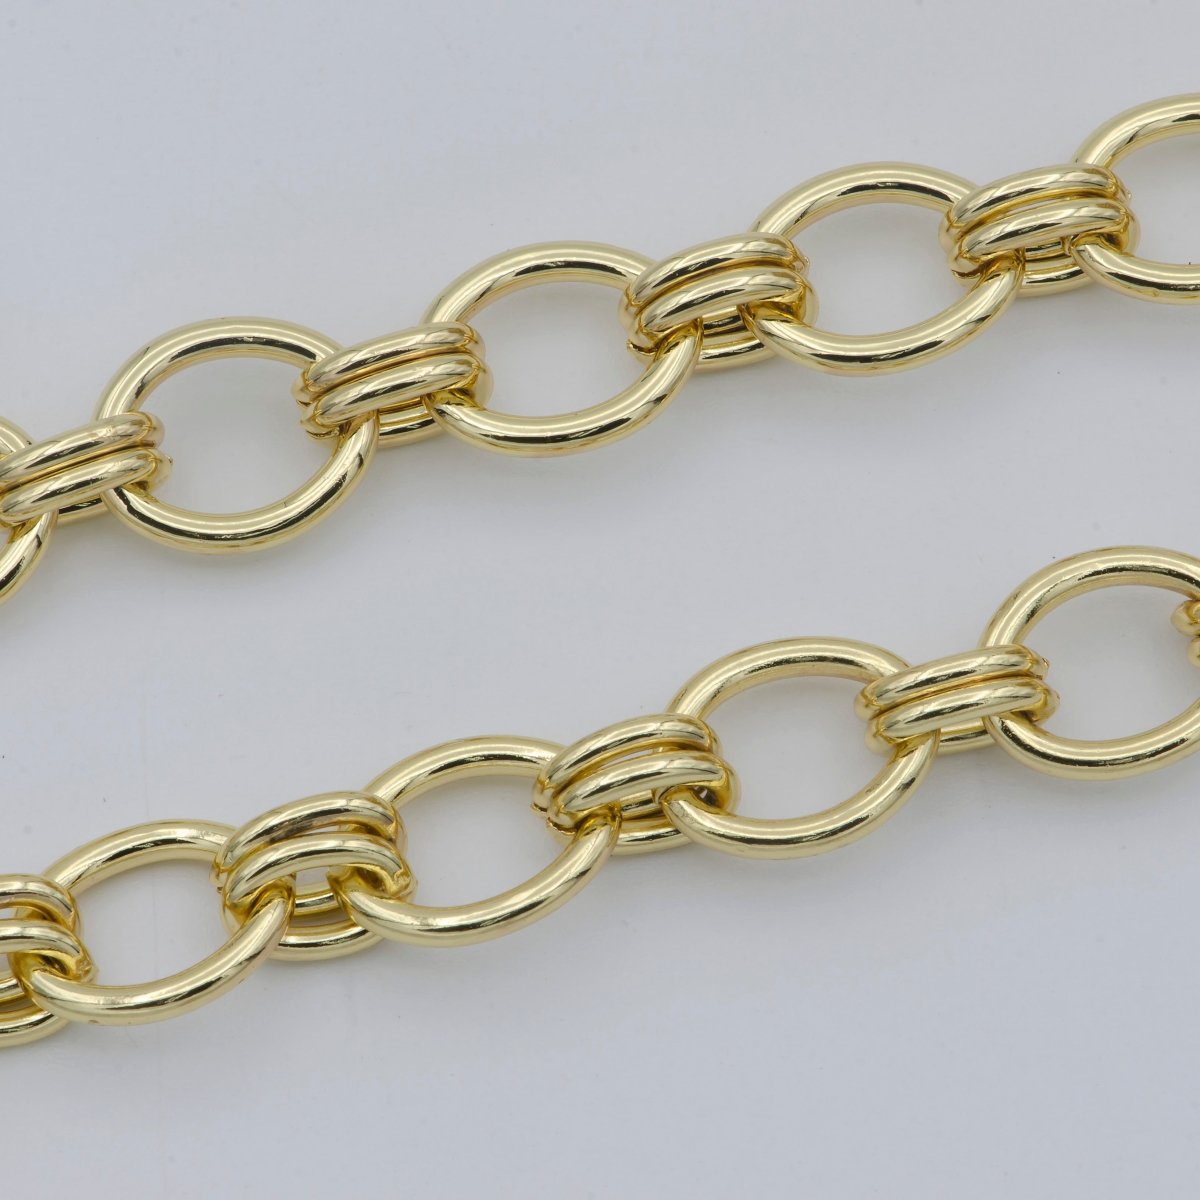 24K Gold Filled Gold Chunky Oval Cable Chain by Yard, 10.4X12.6mm, Bold ROLO Cable Chain, Fancy Statement Chain, Wholesale Bulk Chain | ROLL-468 Clearance Pricing - DLUXCA